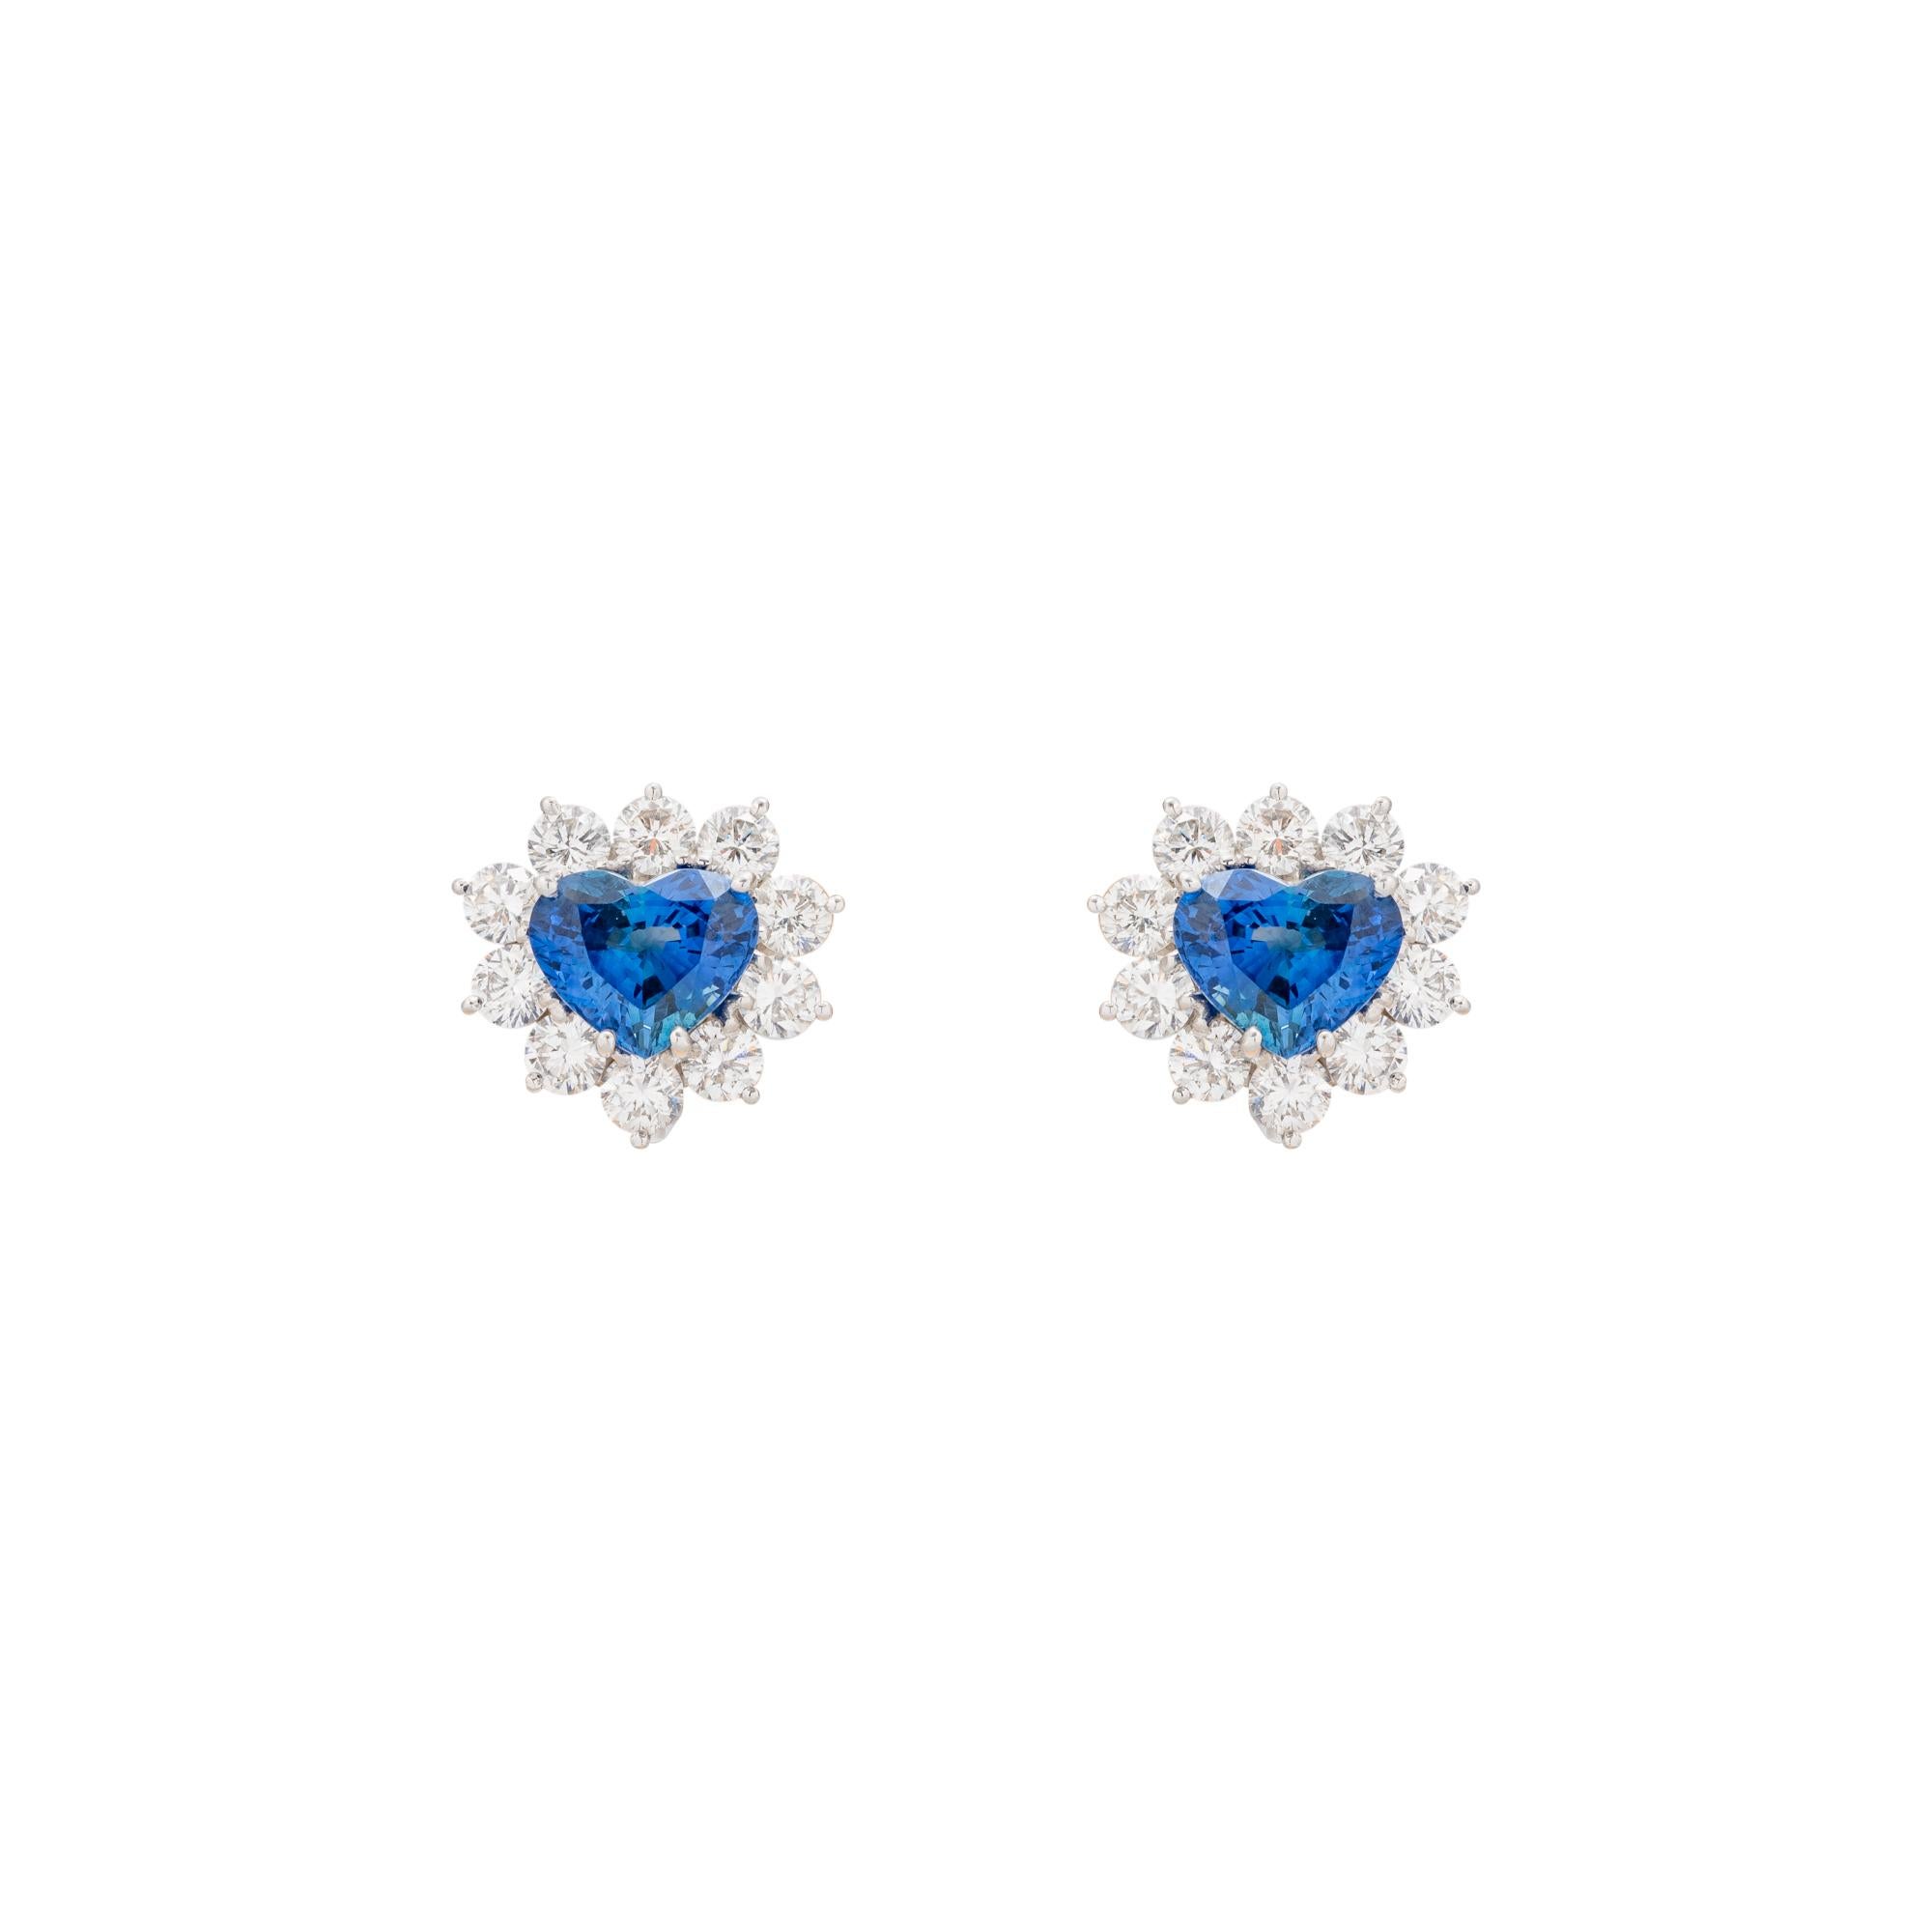 Platinum Heart Shaped Sapphire and Diamond earrings featuring two heart shaped earrings with a total weight of 4.91 carats, framed with 10 round brilliant cut diamonds with a total weight 3.66 carats.


